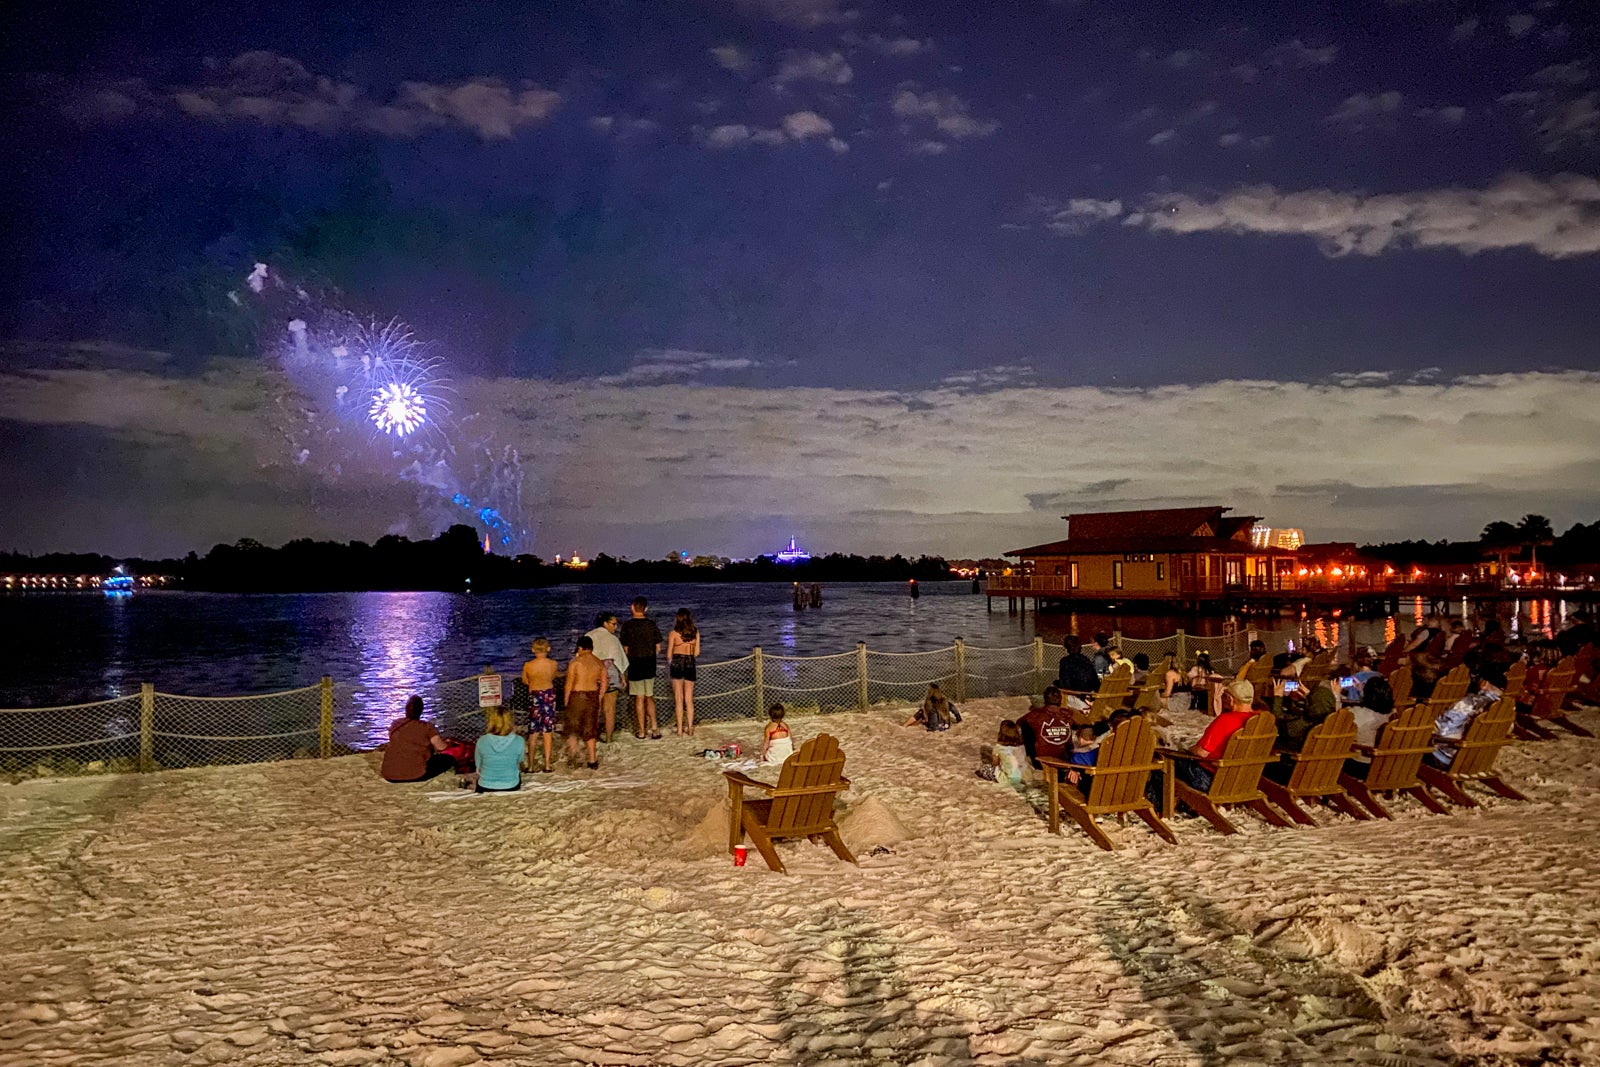 Watching the Disney World fireworks from a beach